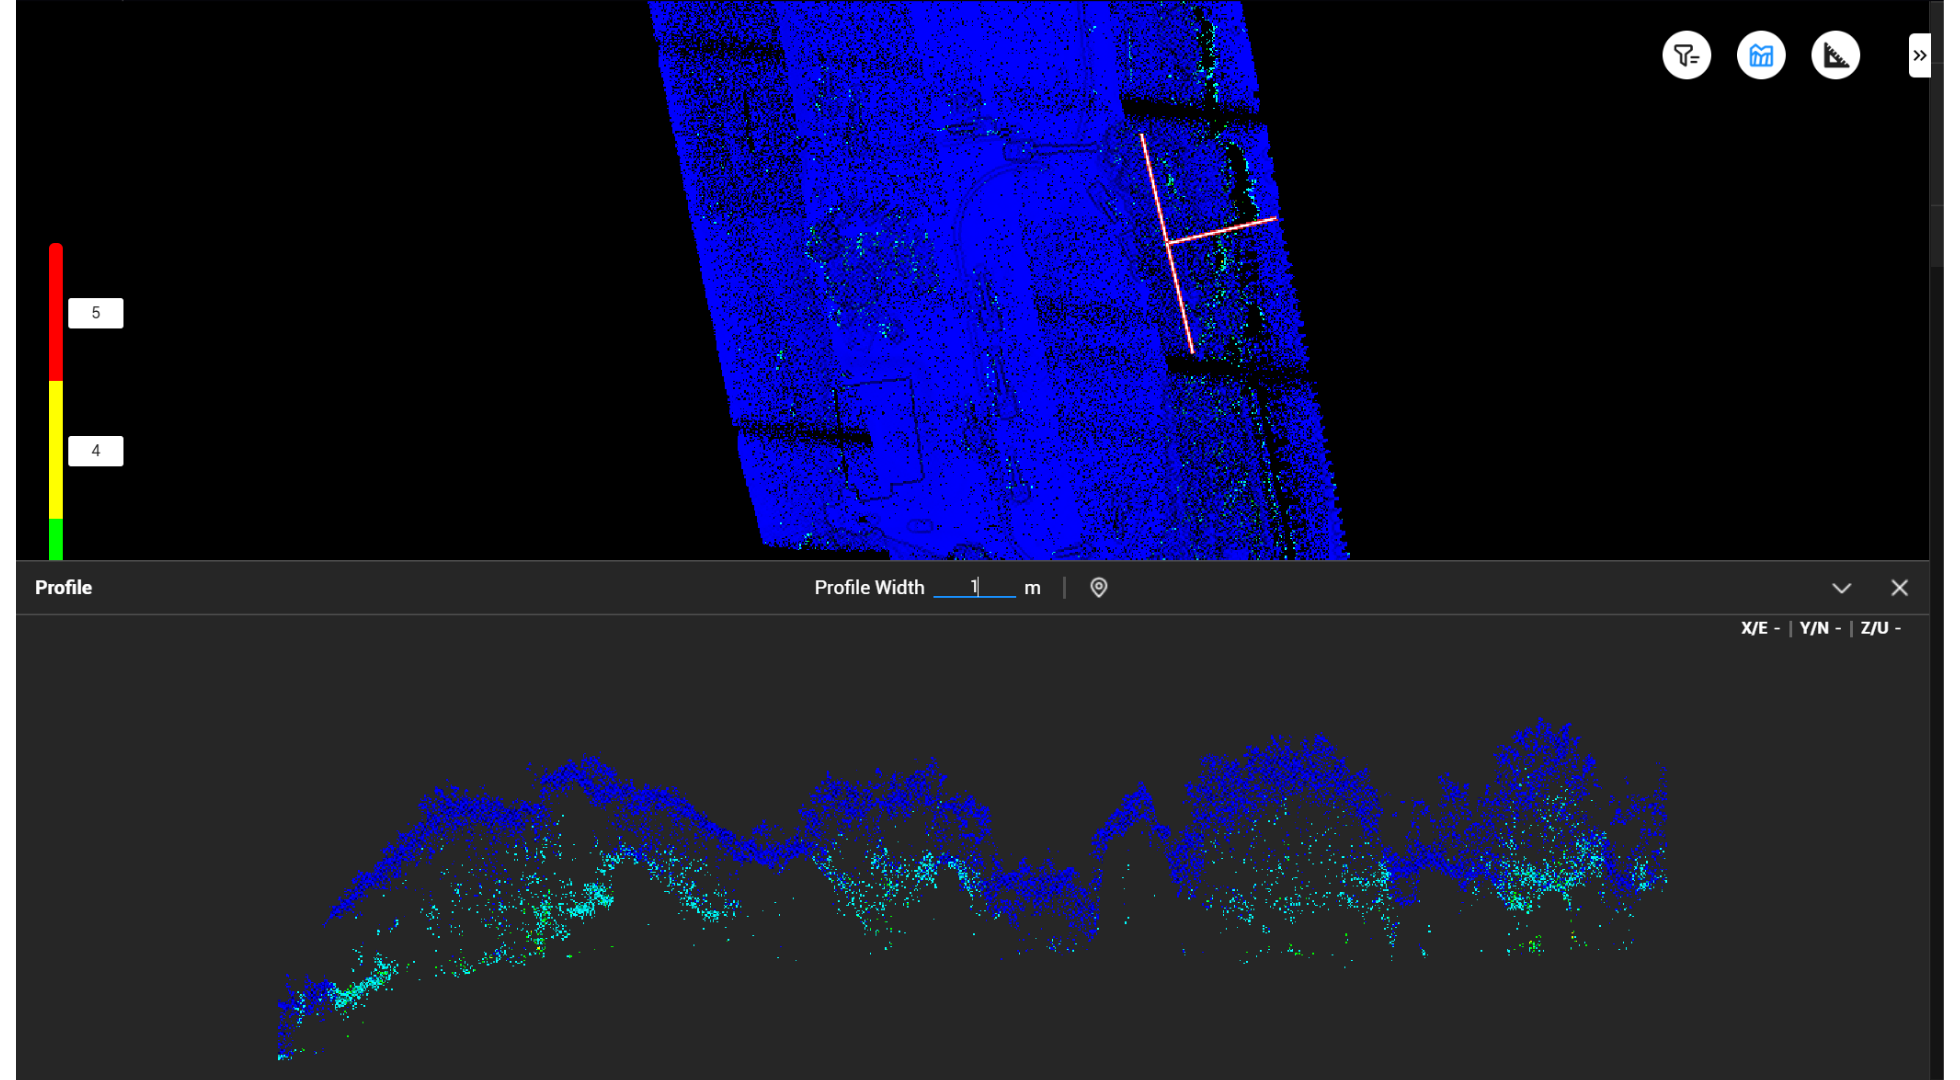 DJI Terra now enables you to view a cross-section of a LiDAR dataset.